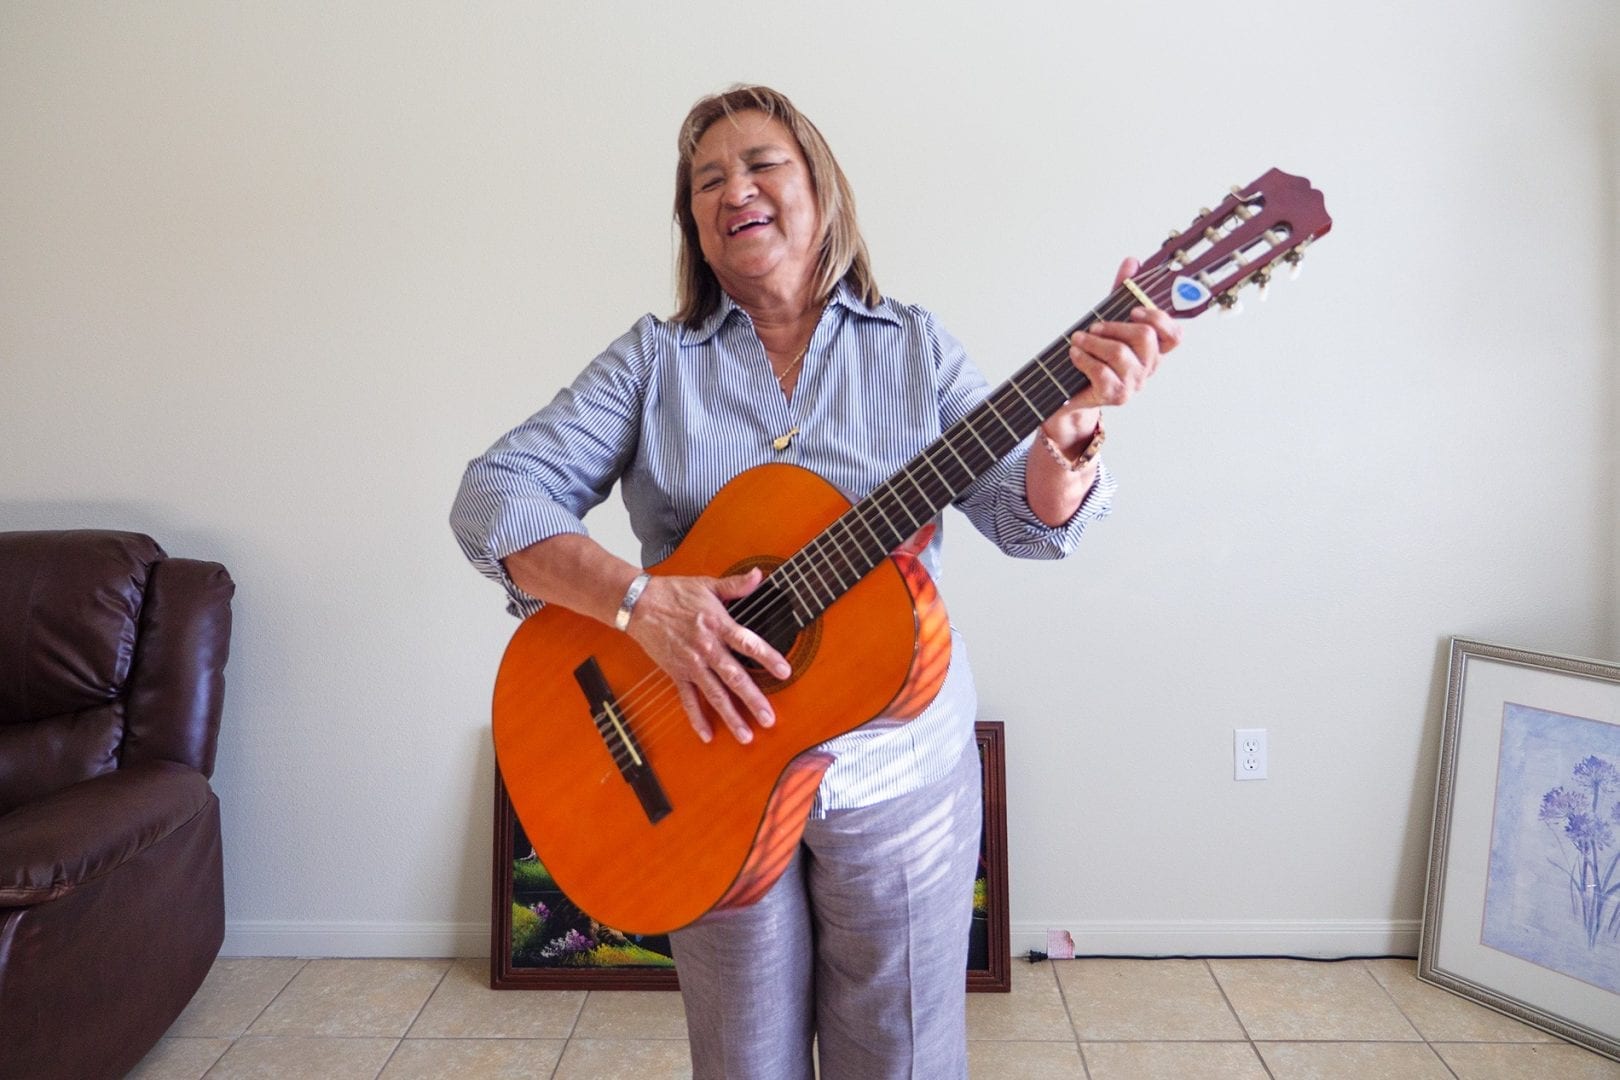 A smiling woman playing an acoustic guitar